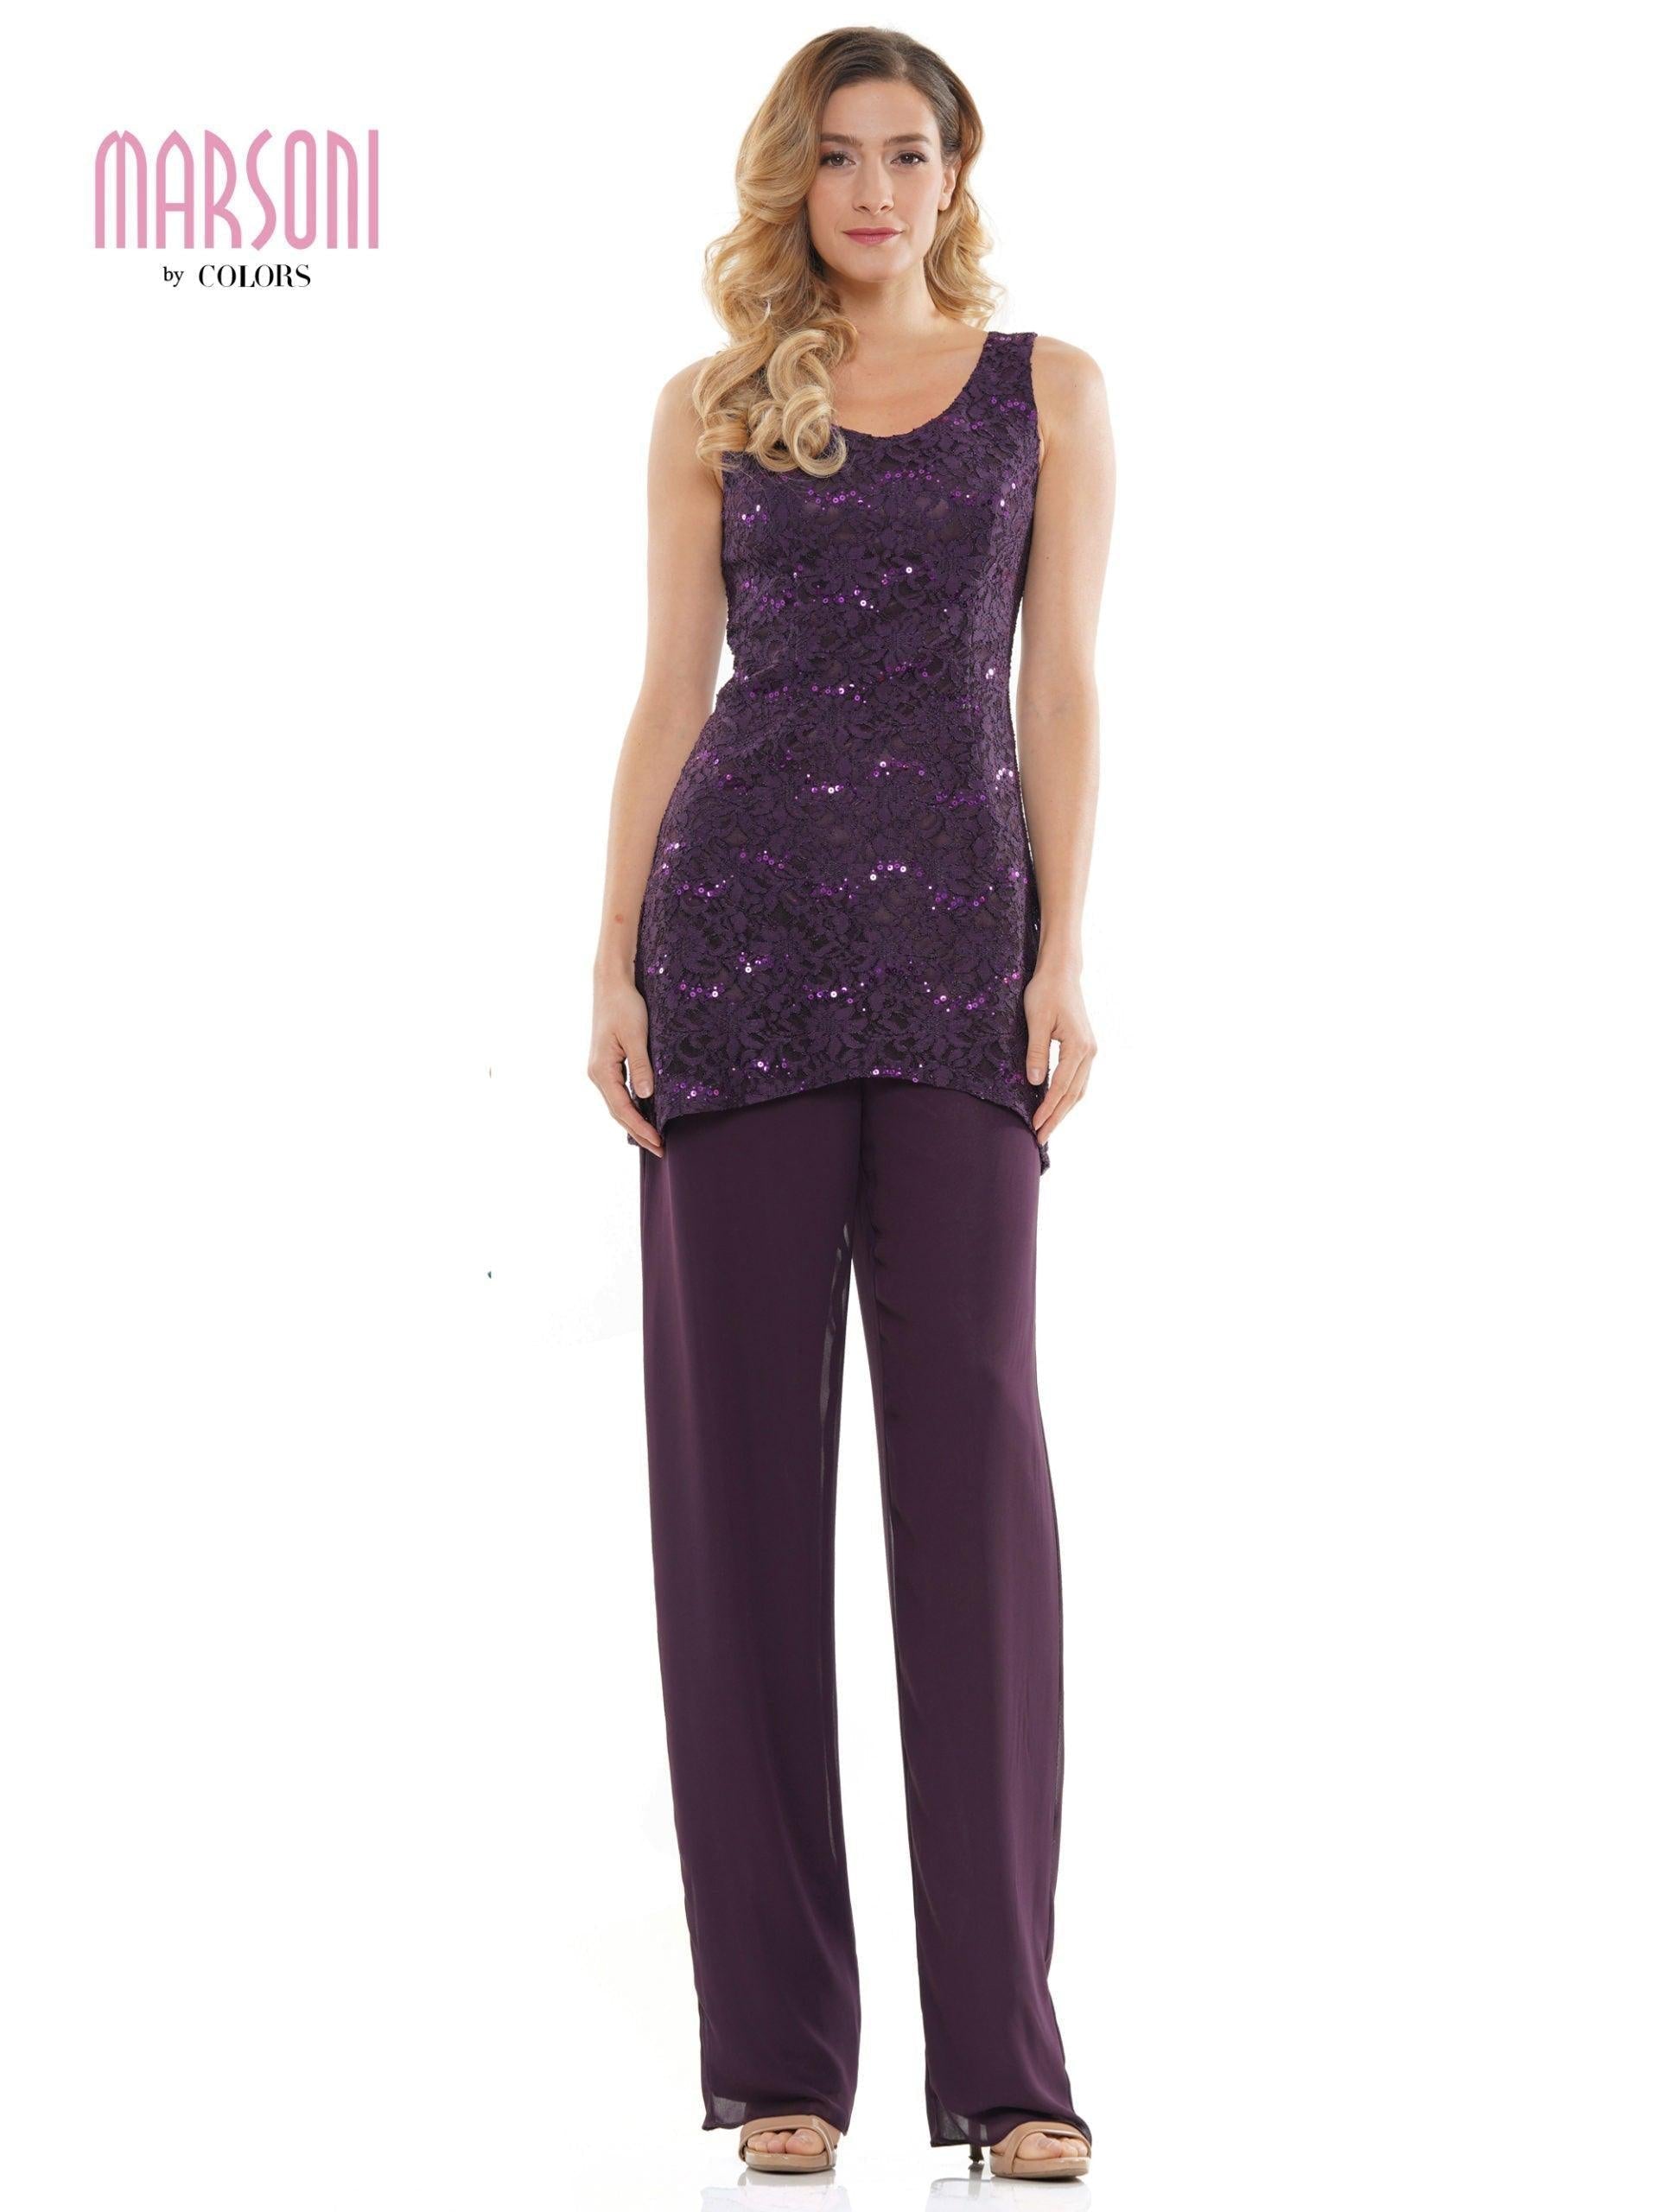 Marsoni Formal Mother of the Bride Pant Suit Sale 303 - The Dress Outlet